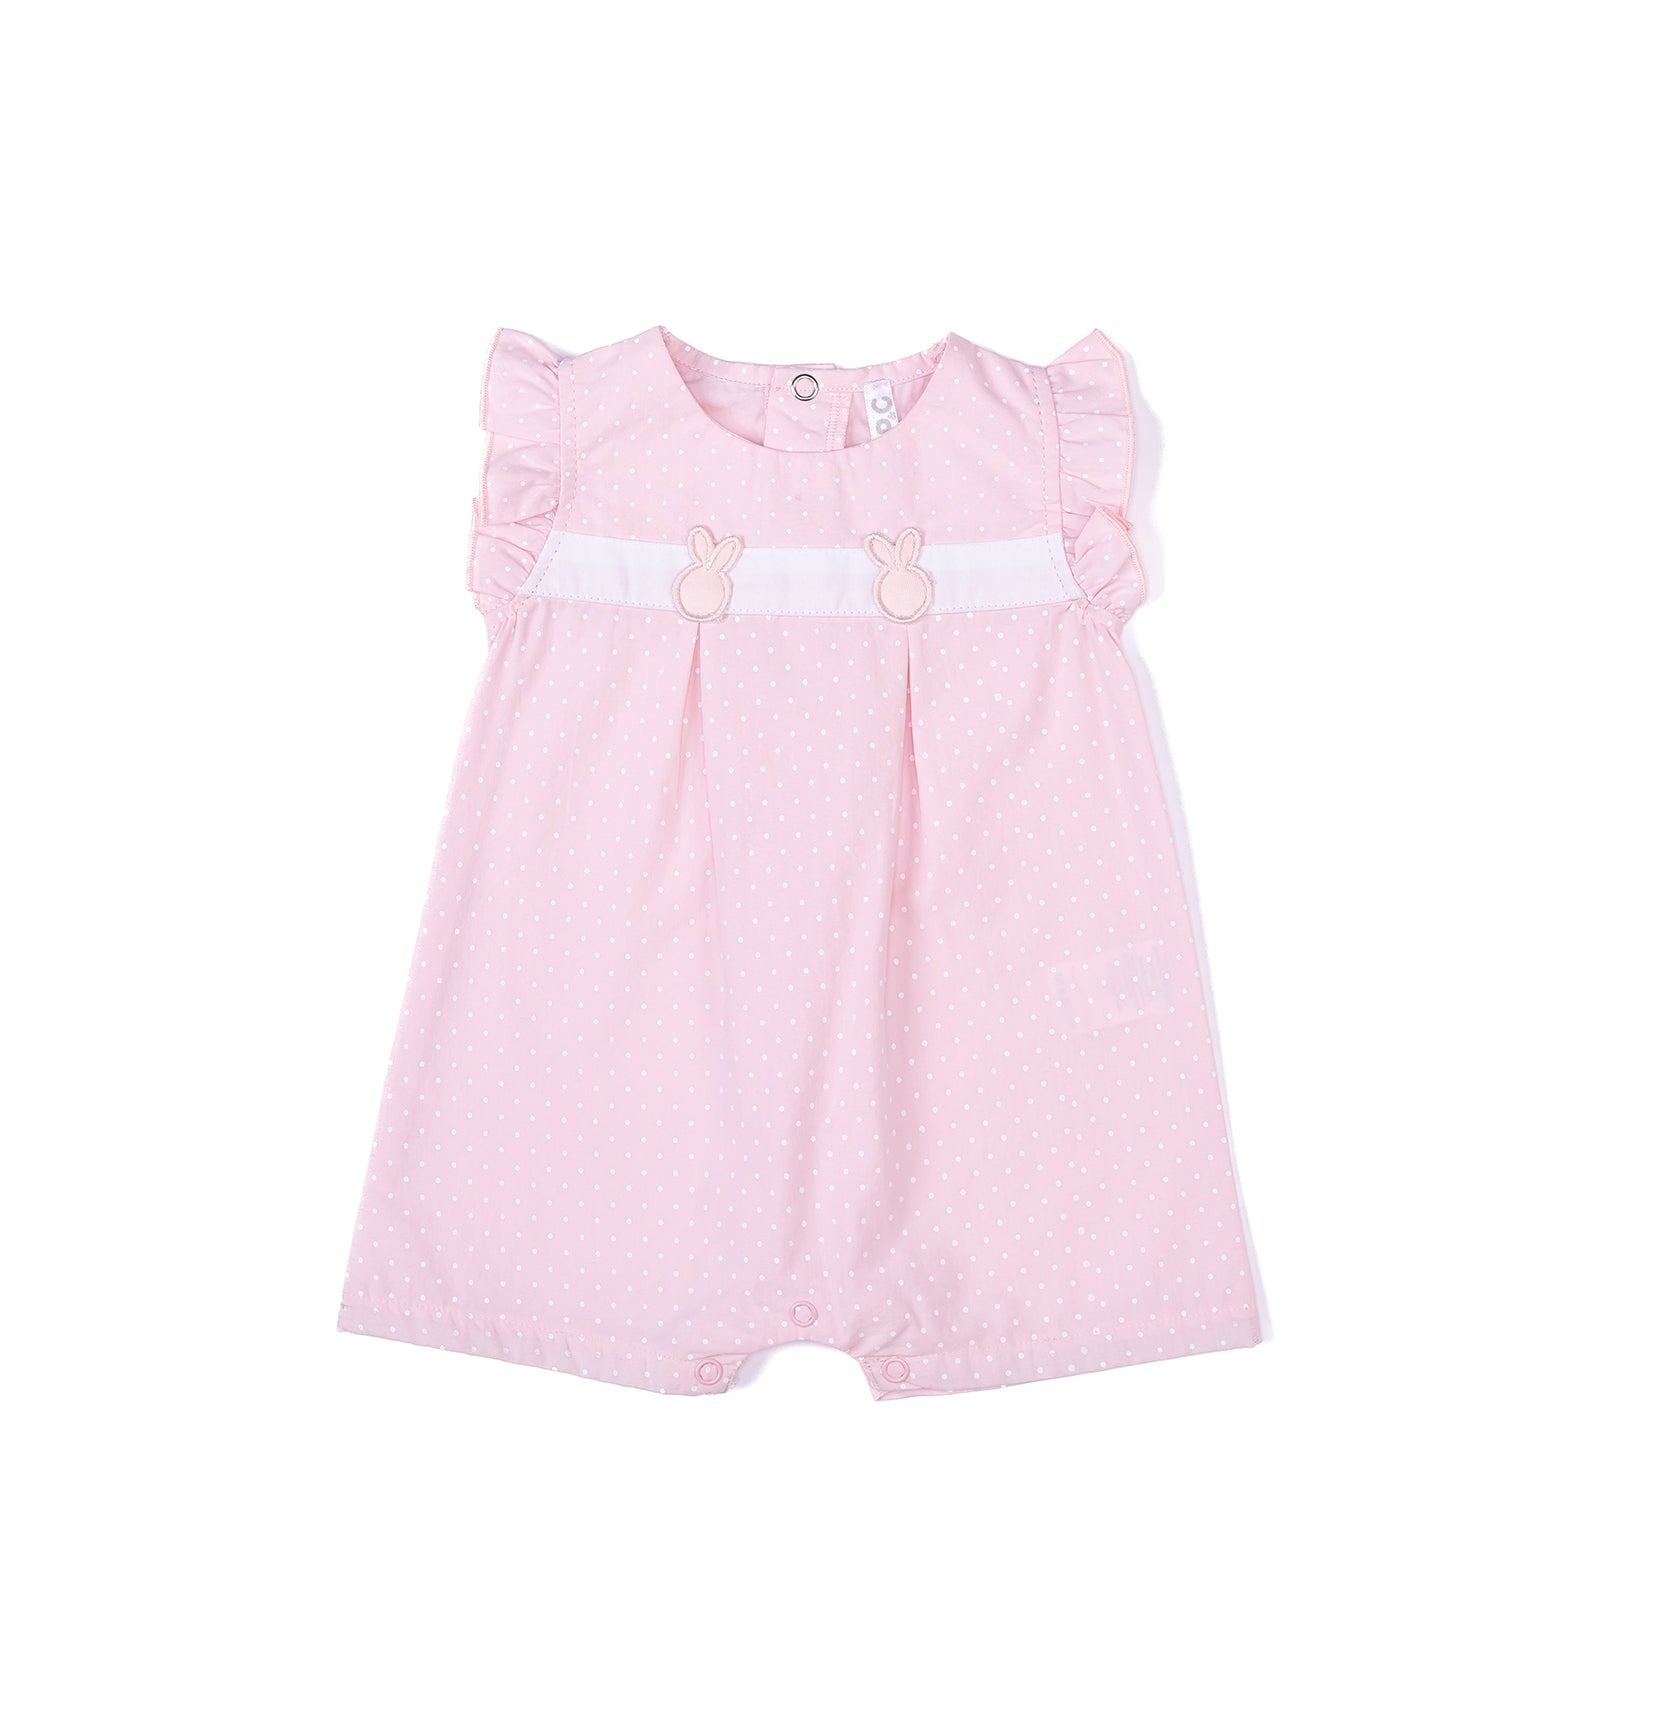 Baby girl summer cute romper by Pompelo